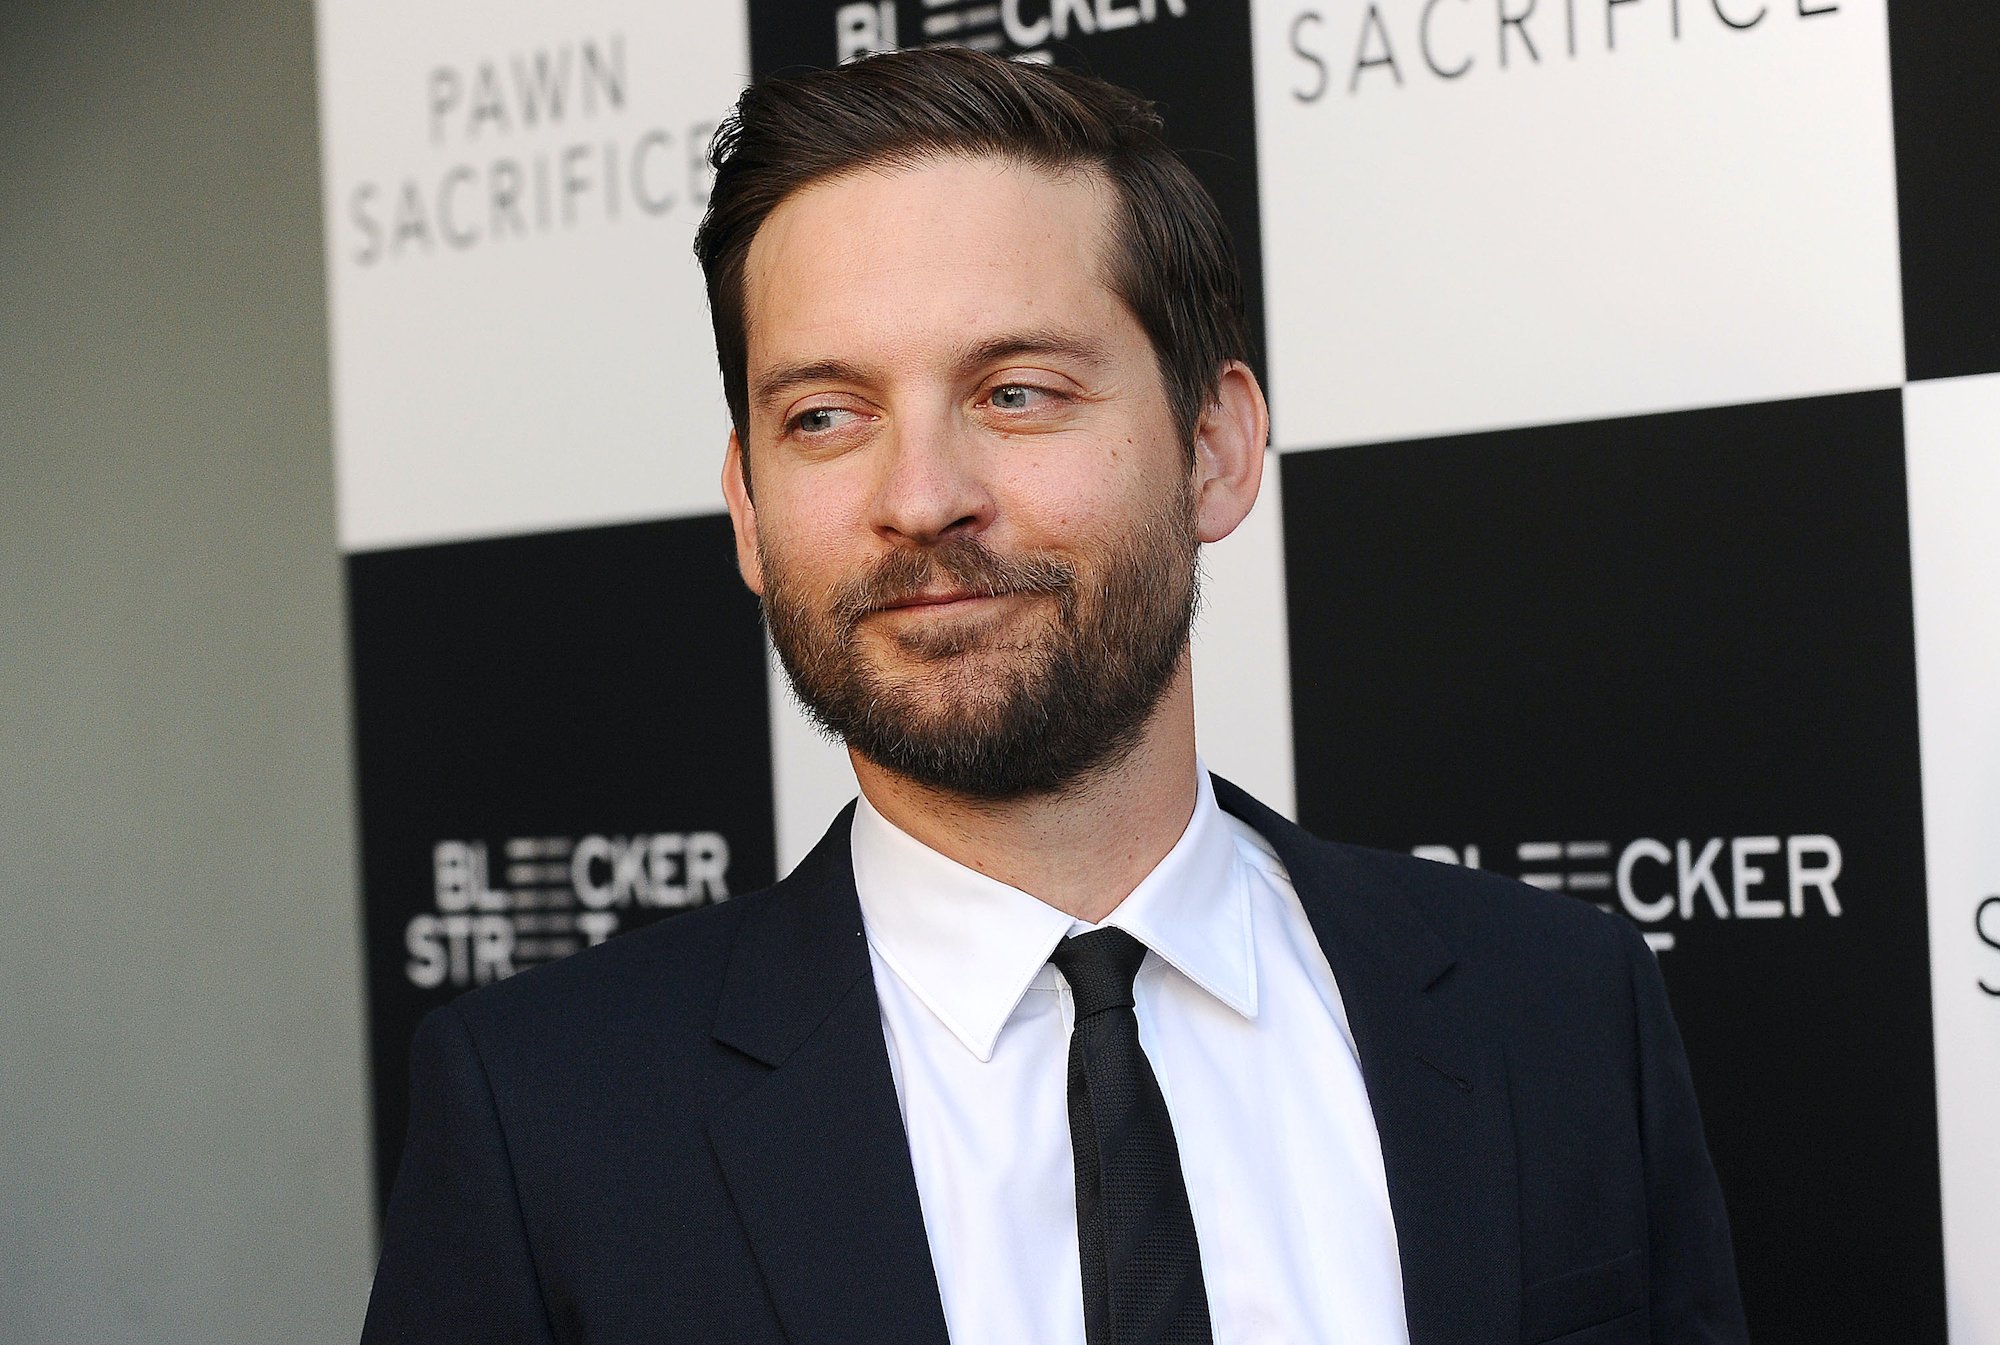 Actor Tobey Maguire